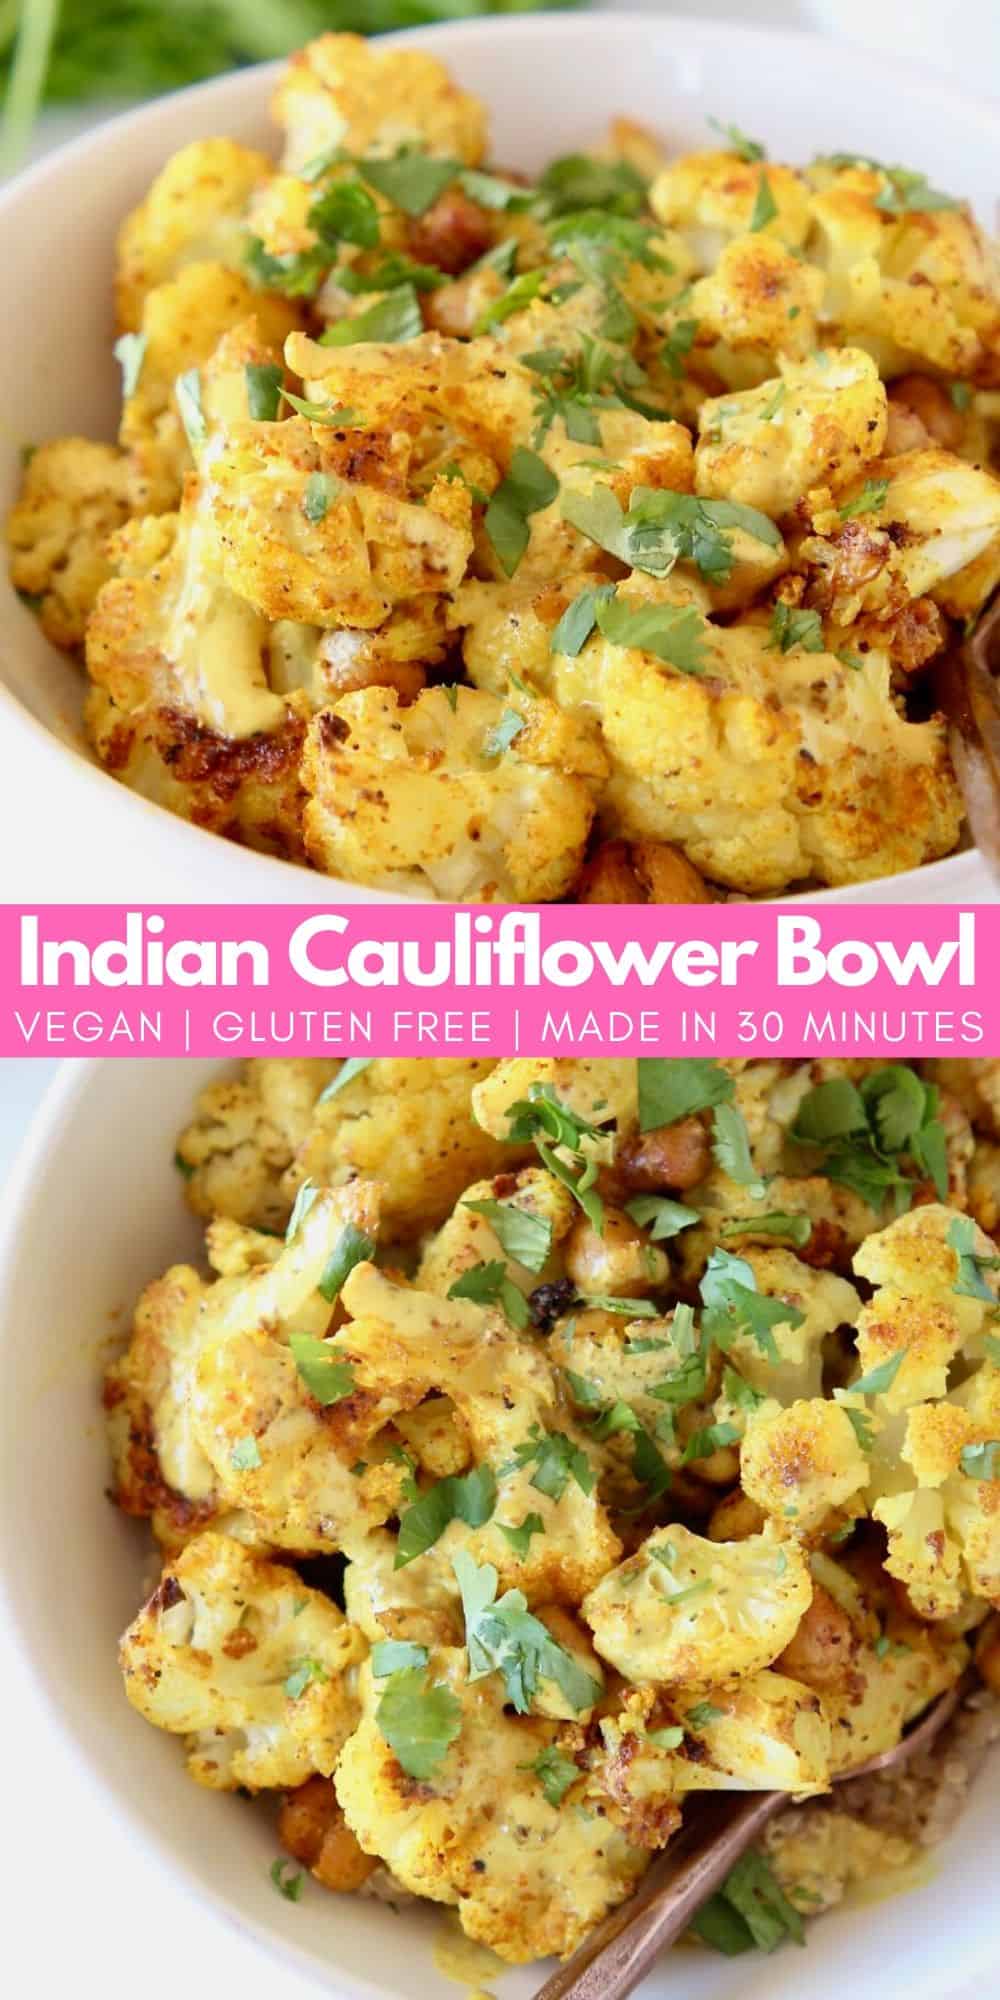 Roasted Indian Cauliflower Bowl - Bowls Are The New Plates